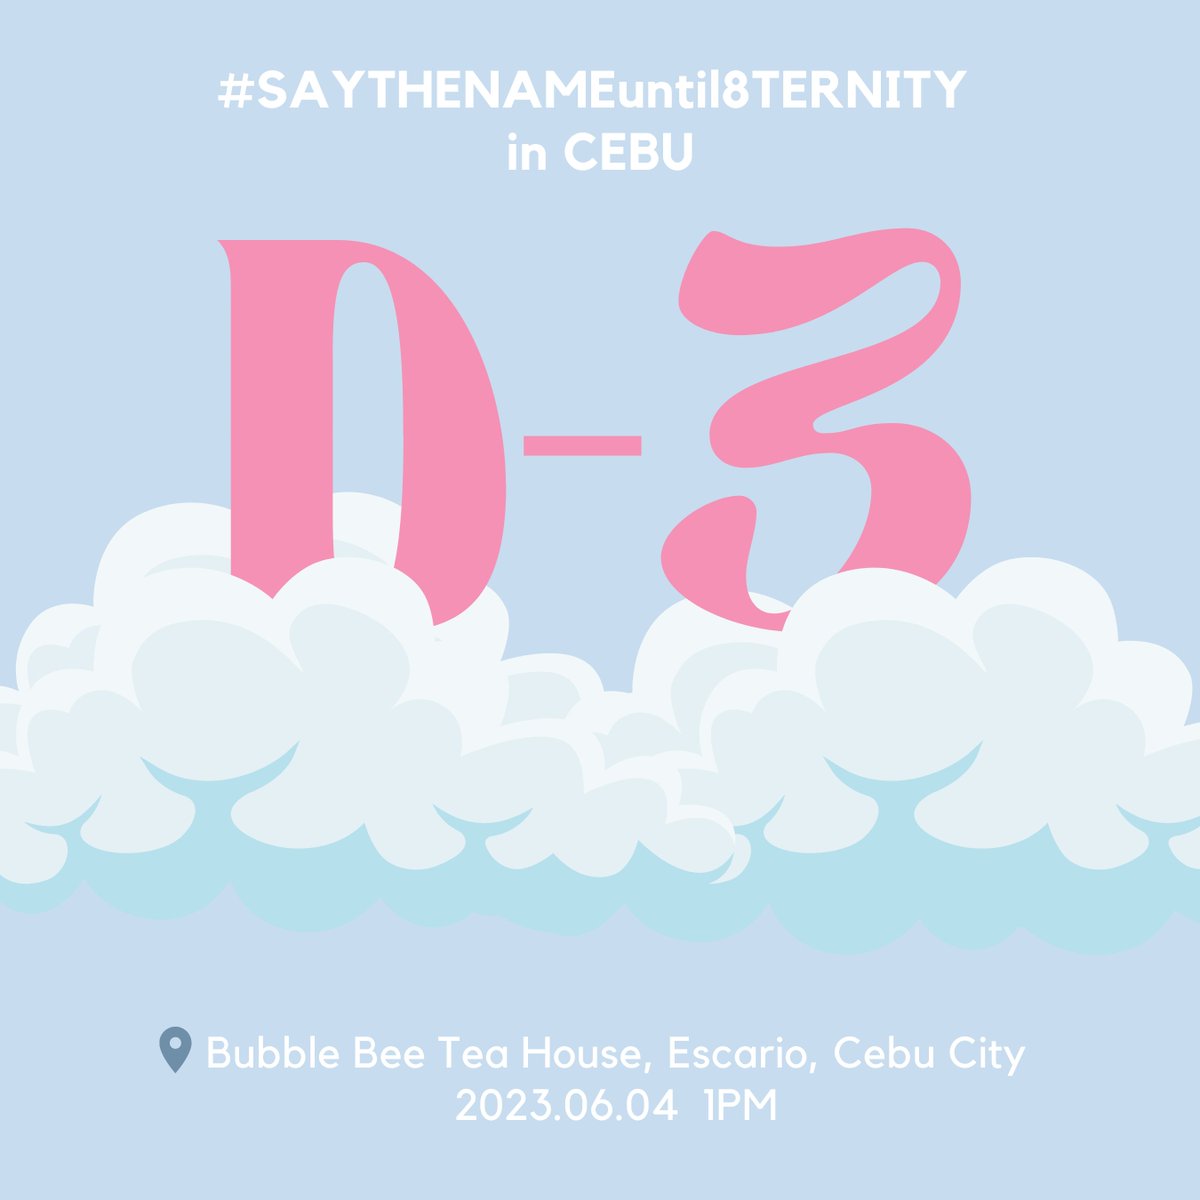 There's no such thing as late celebration as we are 3 DAYS away from #SAYTHENAMEuntil8TERNITY CEBU Chapter!! We definitely can't wait to celebrate with you, Cebuano caratdeuls. ☁️🤍

#SVT_8th_Anniversary 
#8Years_with_CARAT